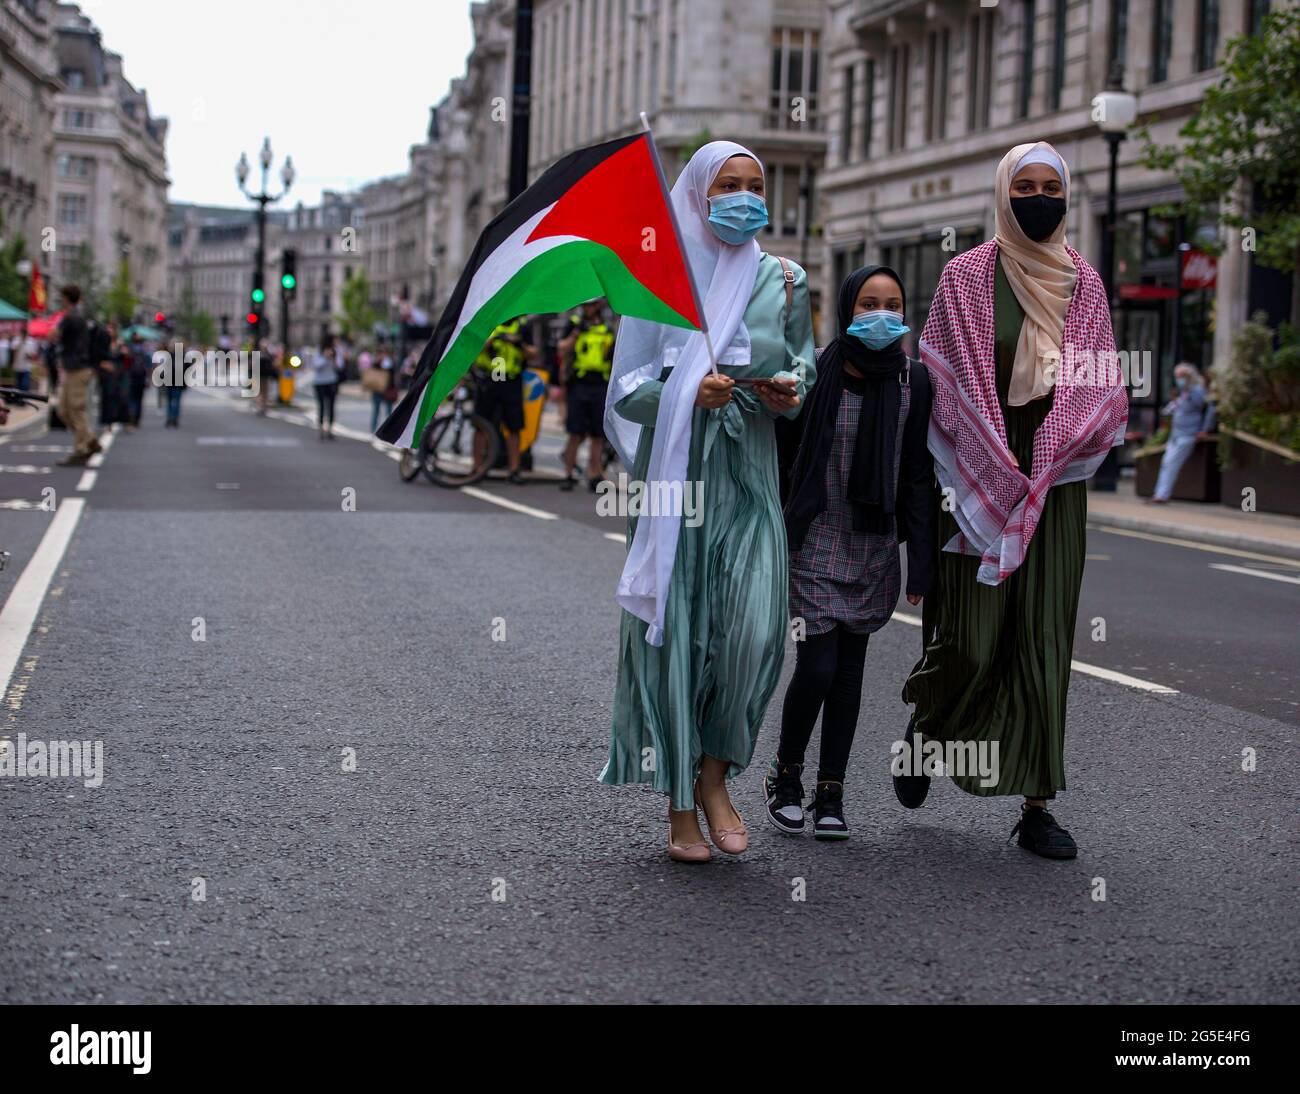 London, UK. 26th June, 2021. An activist hold a Palestinian flag during the demonstration/ People's Assembly held a National Protest in London demonstrating a plethora of issues from the Palestine and Israel conflict, coronavirus issues and the government handling of the pandemic, the police crime bill, and anti-arms matters. (Photo by Loredana Sangiuliano/SOPA Imag/Sipa USA) Credit: Sipa USA/Alamy Live News Stock Photo